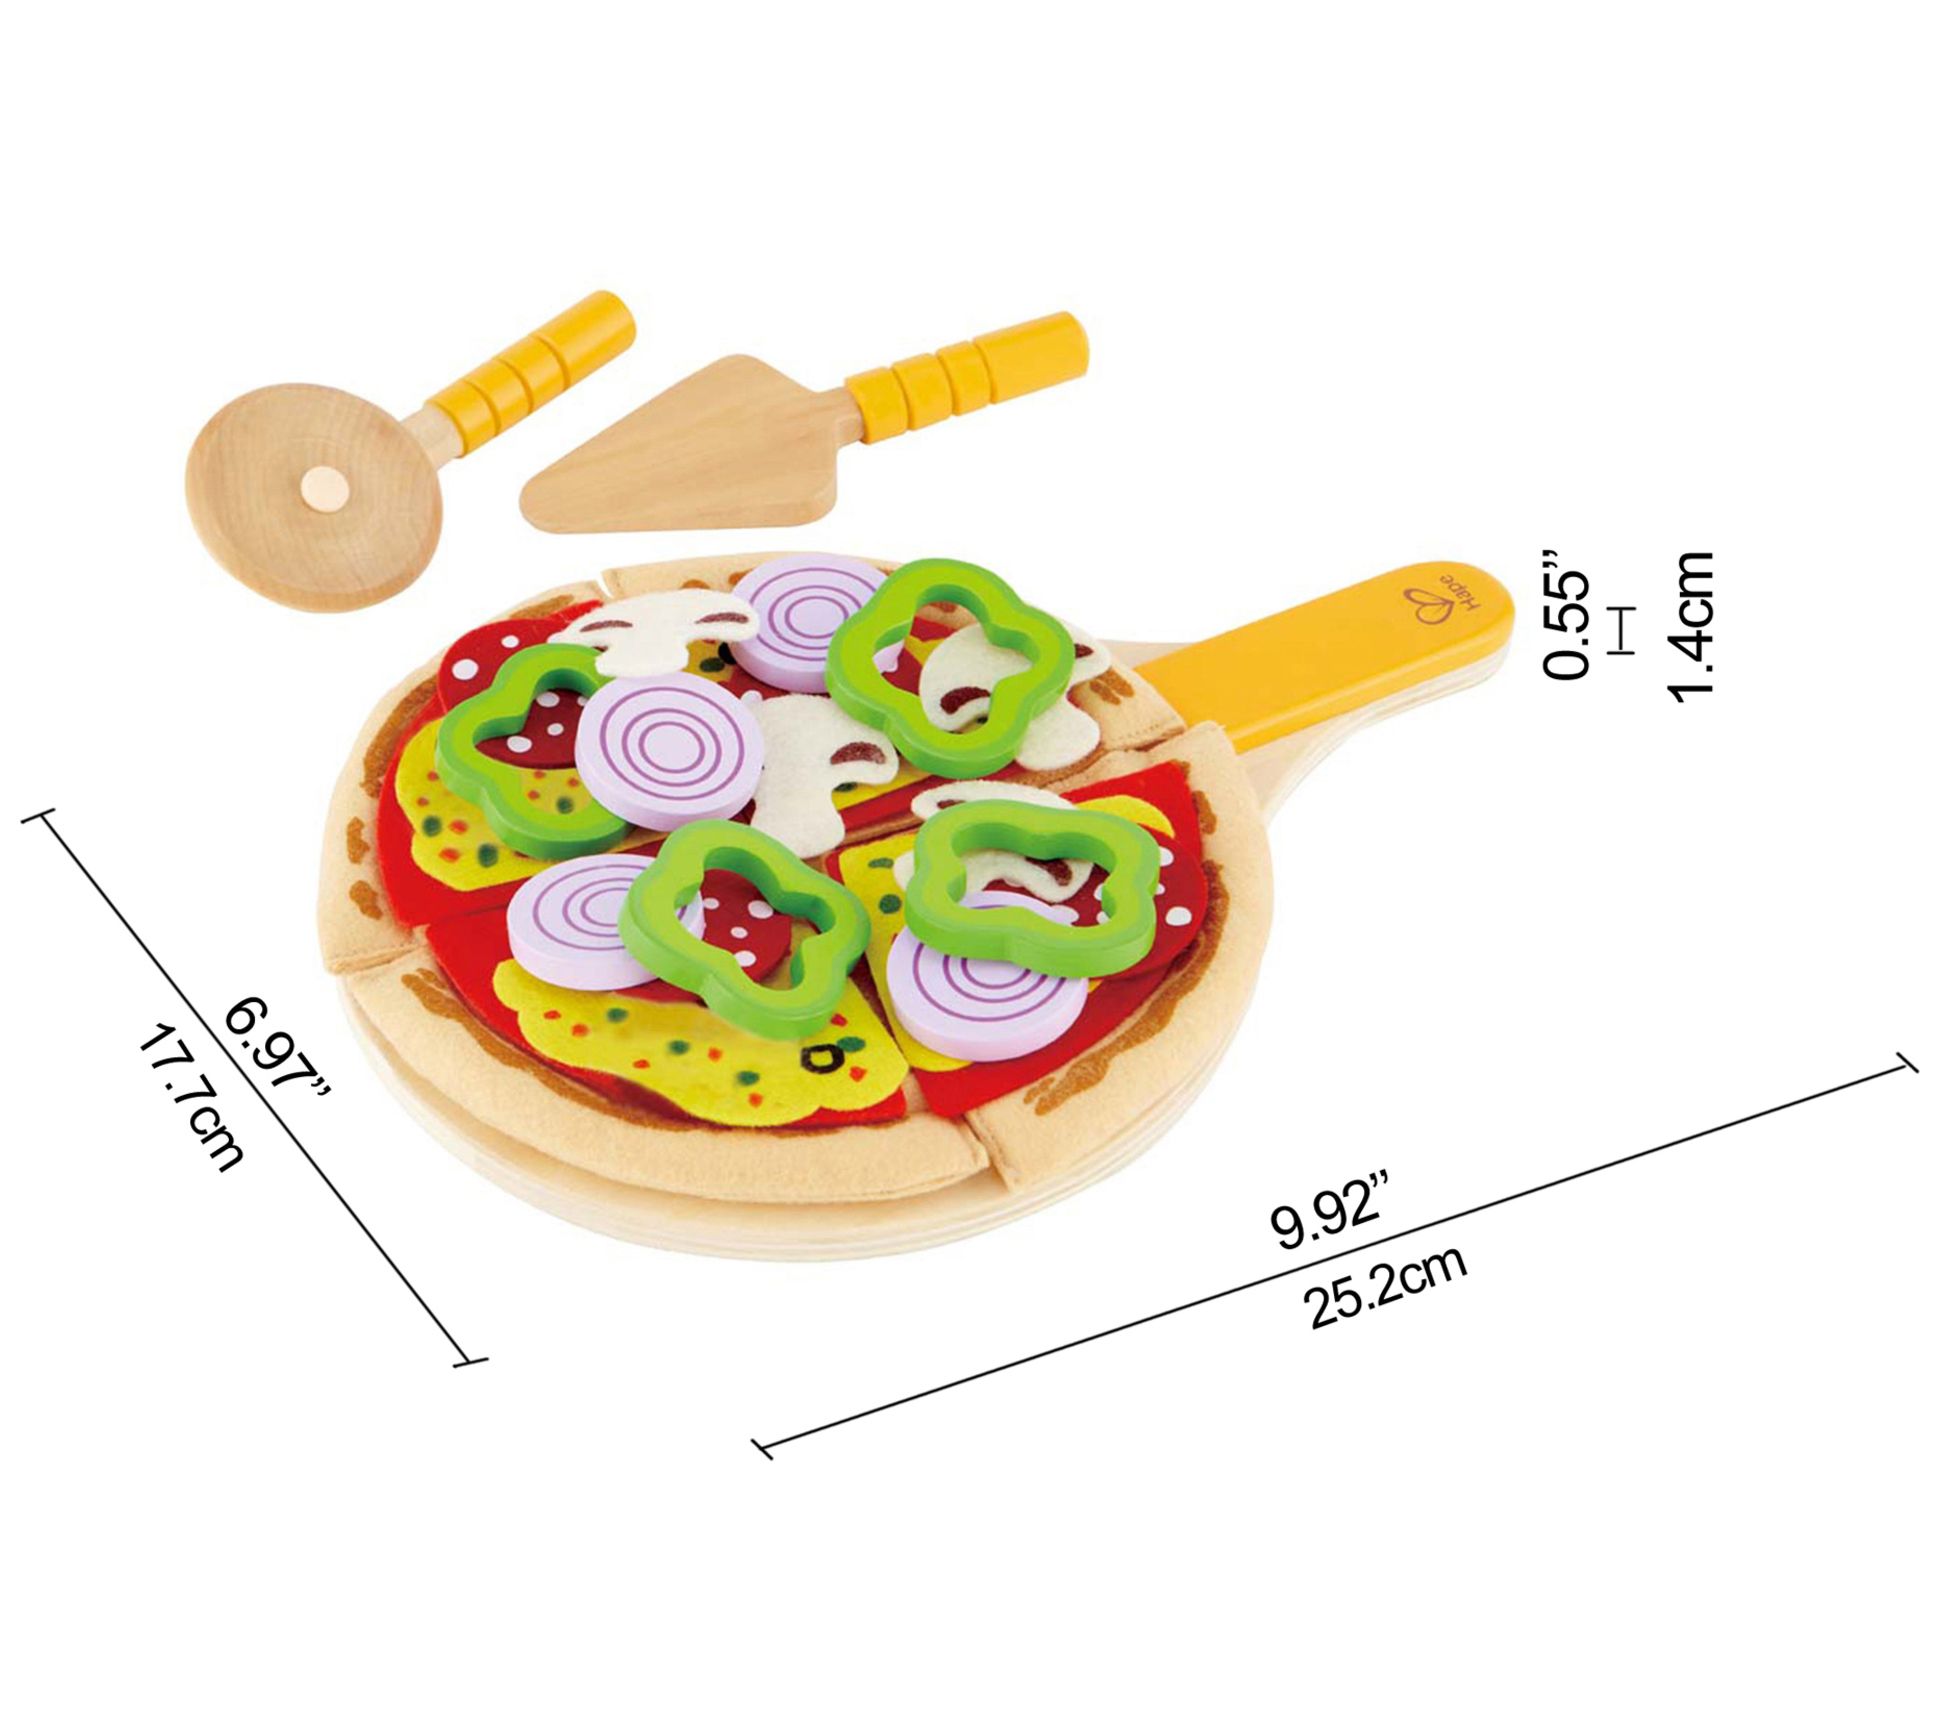 Wood Fire Pizza Oven with Felt Pizzas- pretend play food